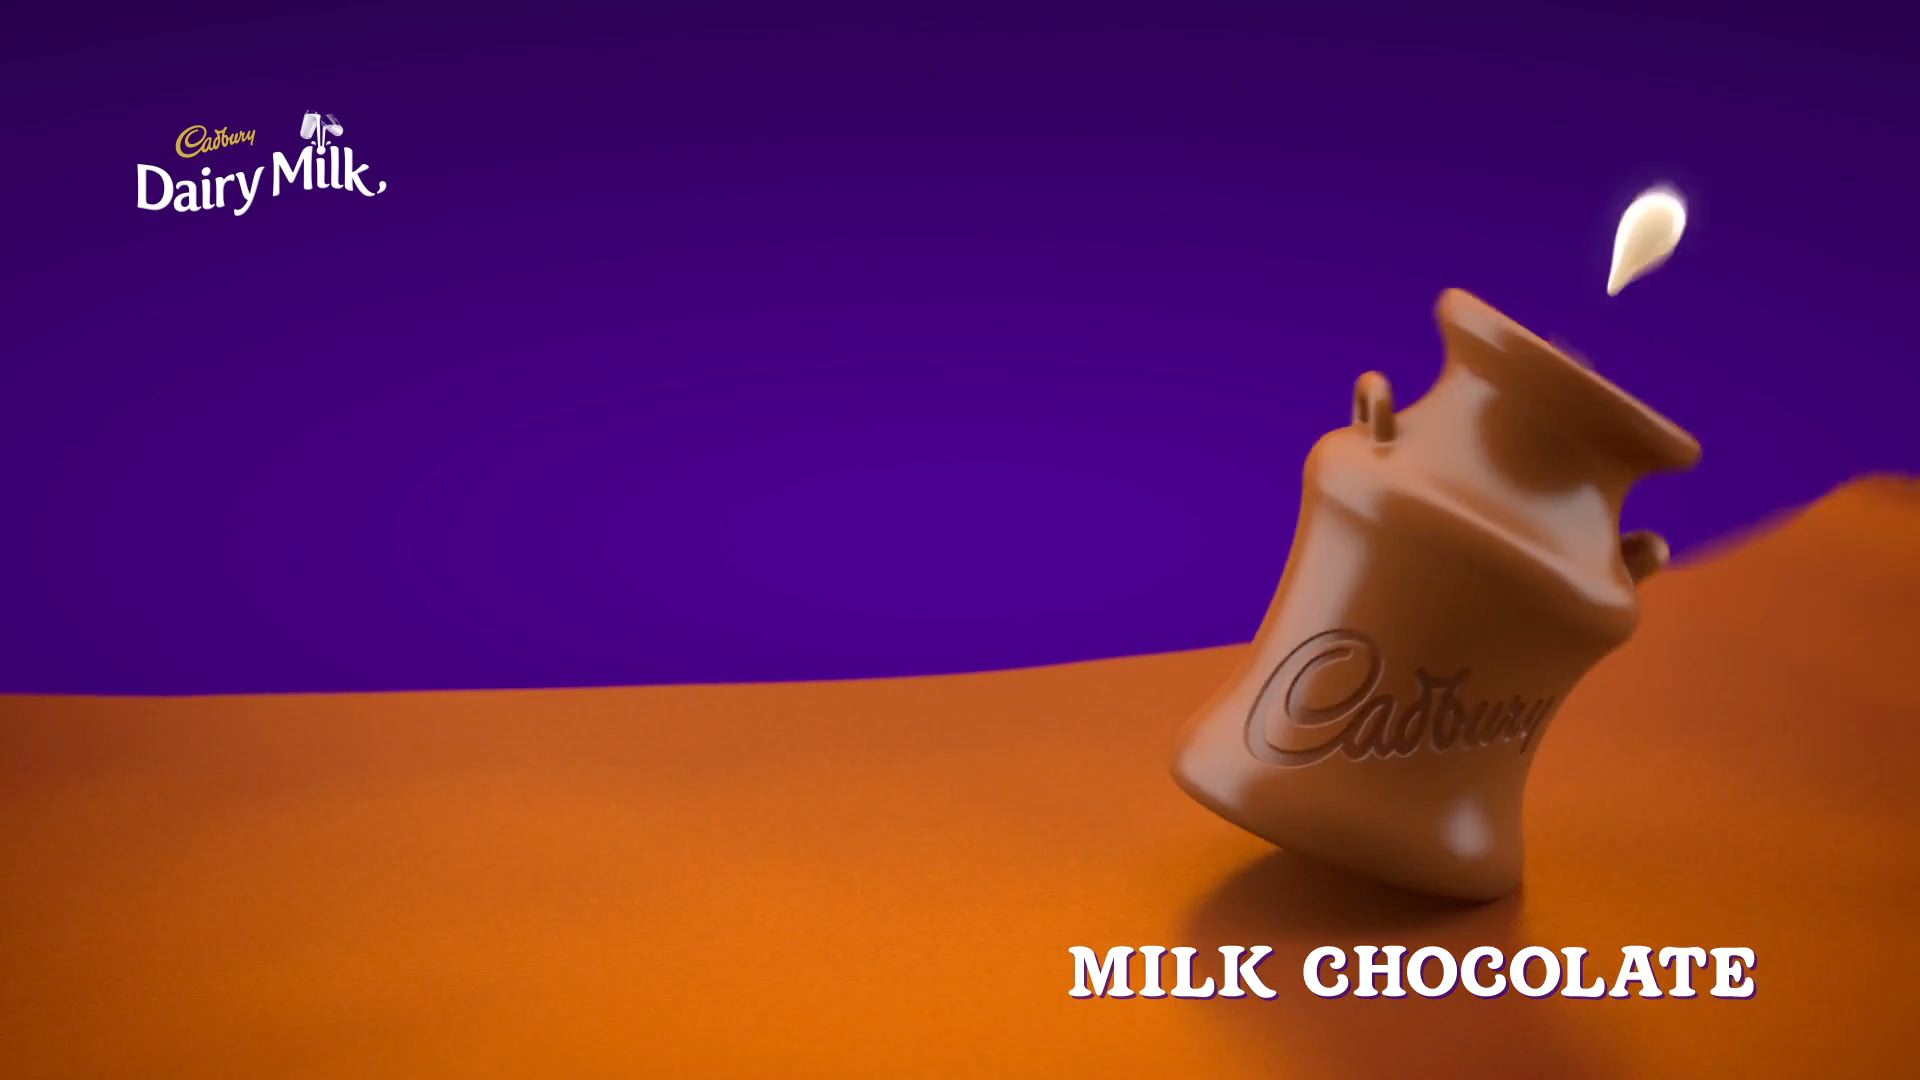 3D animated milk urn made of chocolate